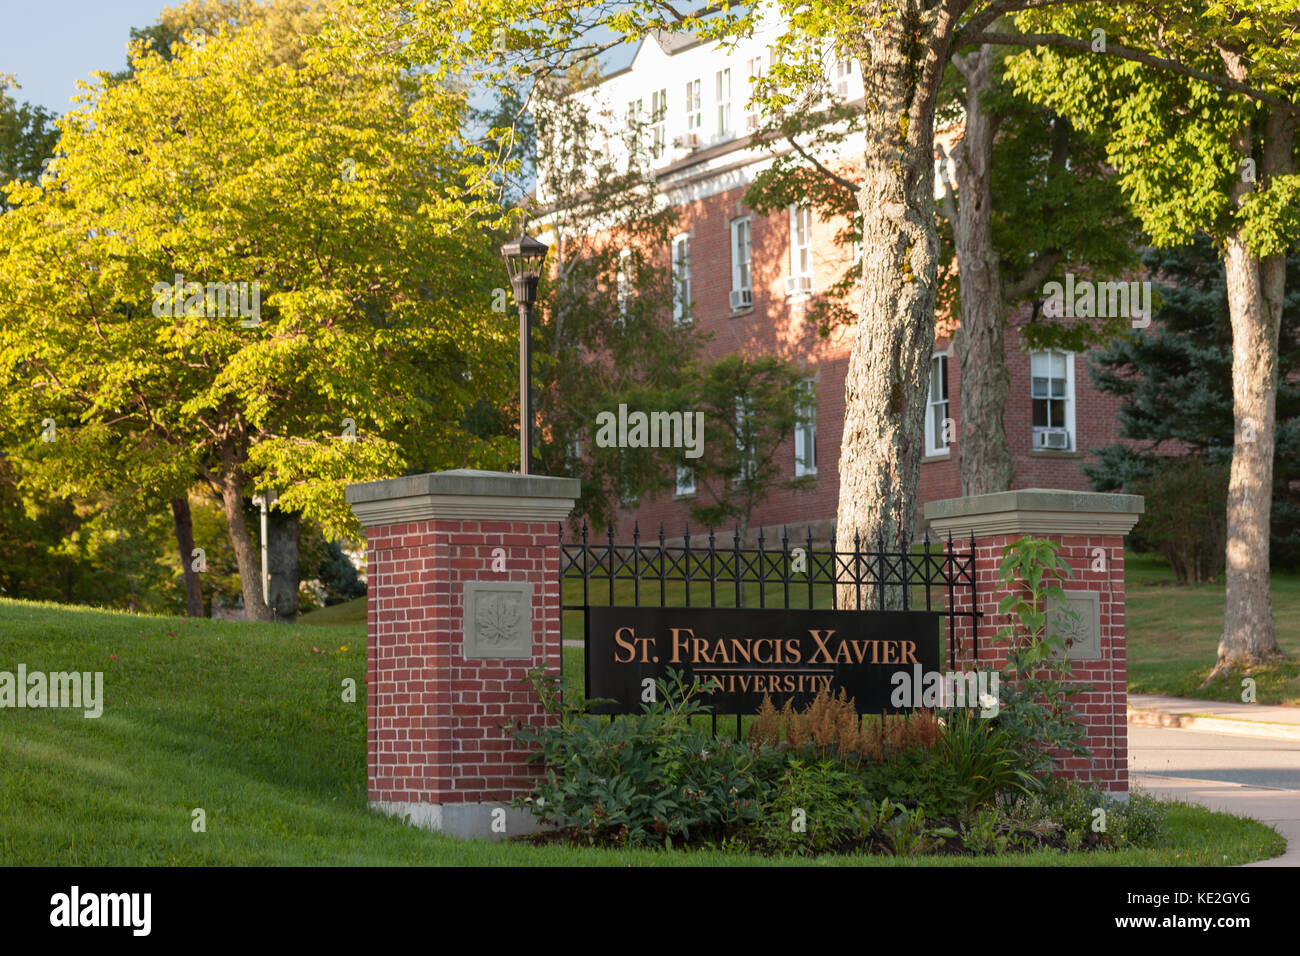 The campus of St. Francis Xavier University in Antigonish, N.S. on August 28, 2017. Stock Photo